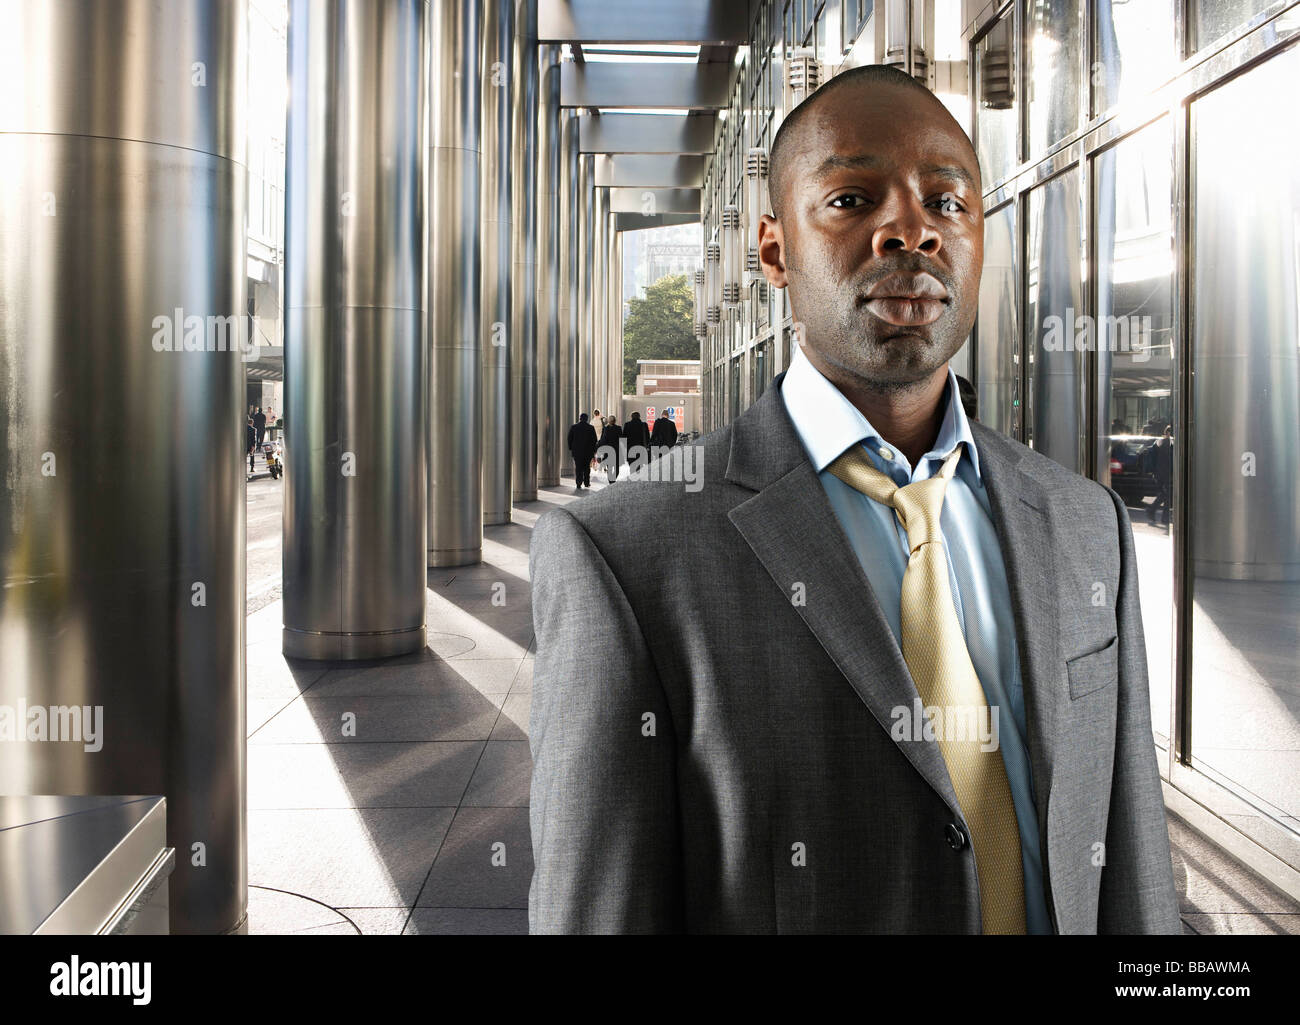 Confident looking suited businessman Stock Photo